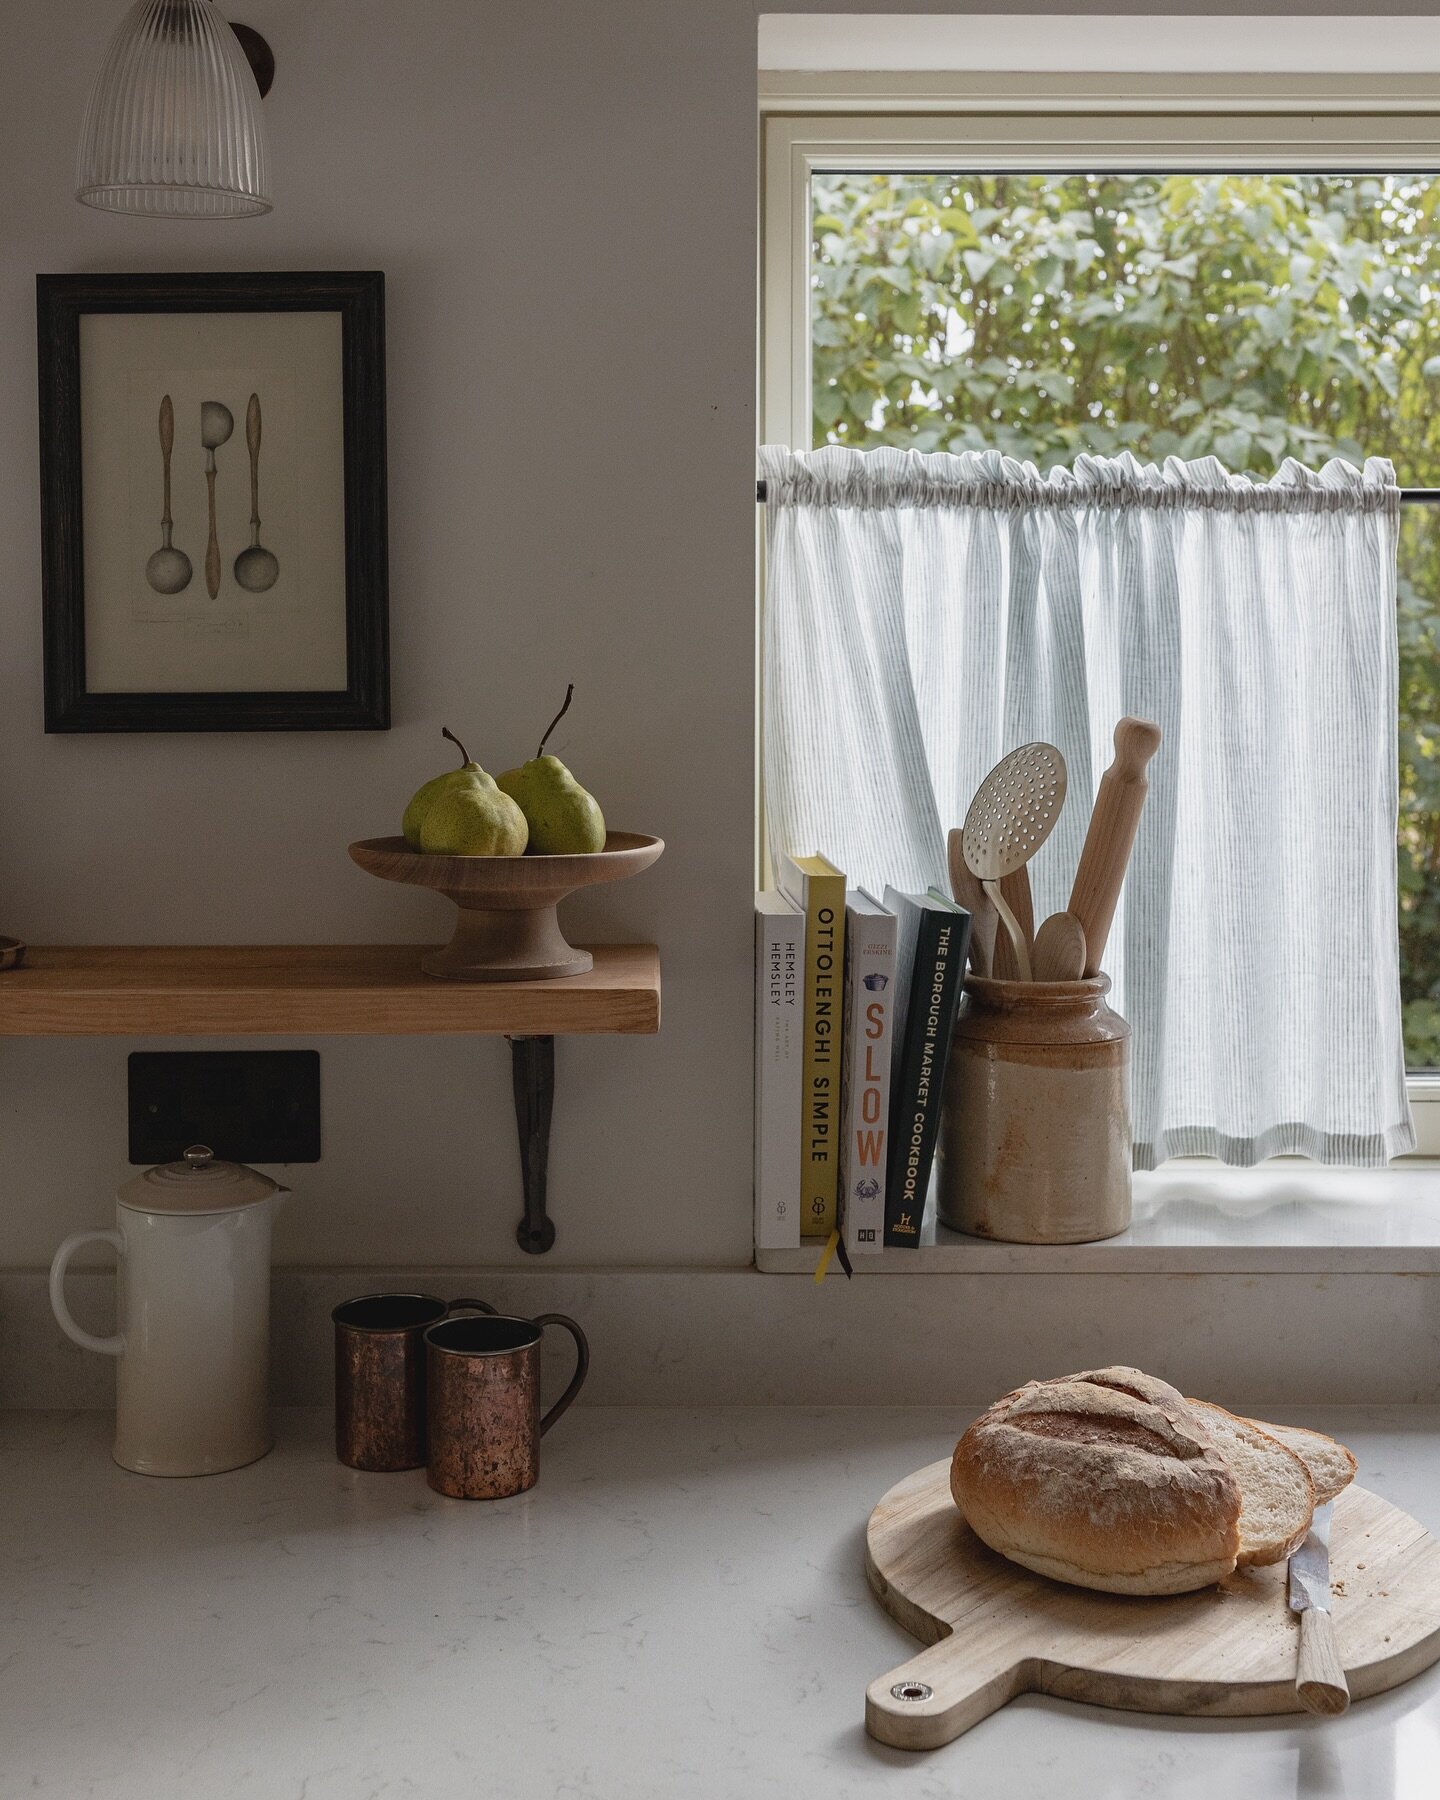 Kitchen details

Shelf and brackets by @folkhaus.co 
Selection of cook books including @melissa.hemsley 
Bread Knife ~ Vintage 
Pedestal wood fruit bowl ~ Vintage
Cafe Curtain Fabric ~ @gpjbaker 

📷 @daisypricephotography